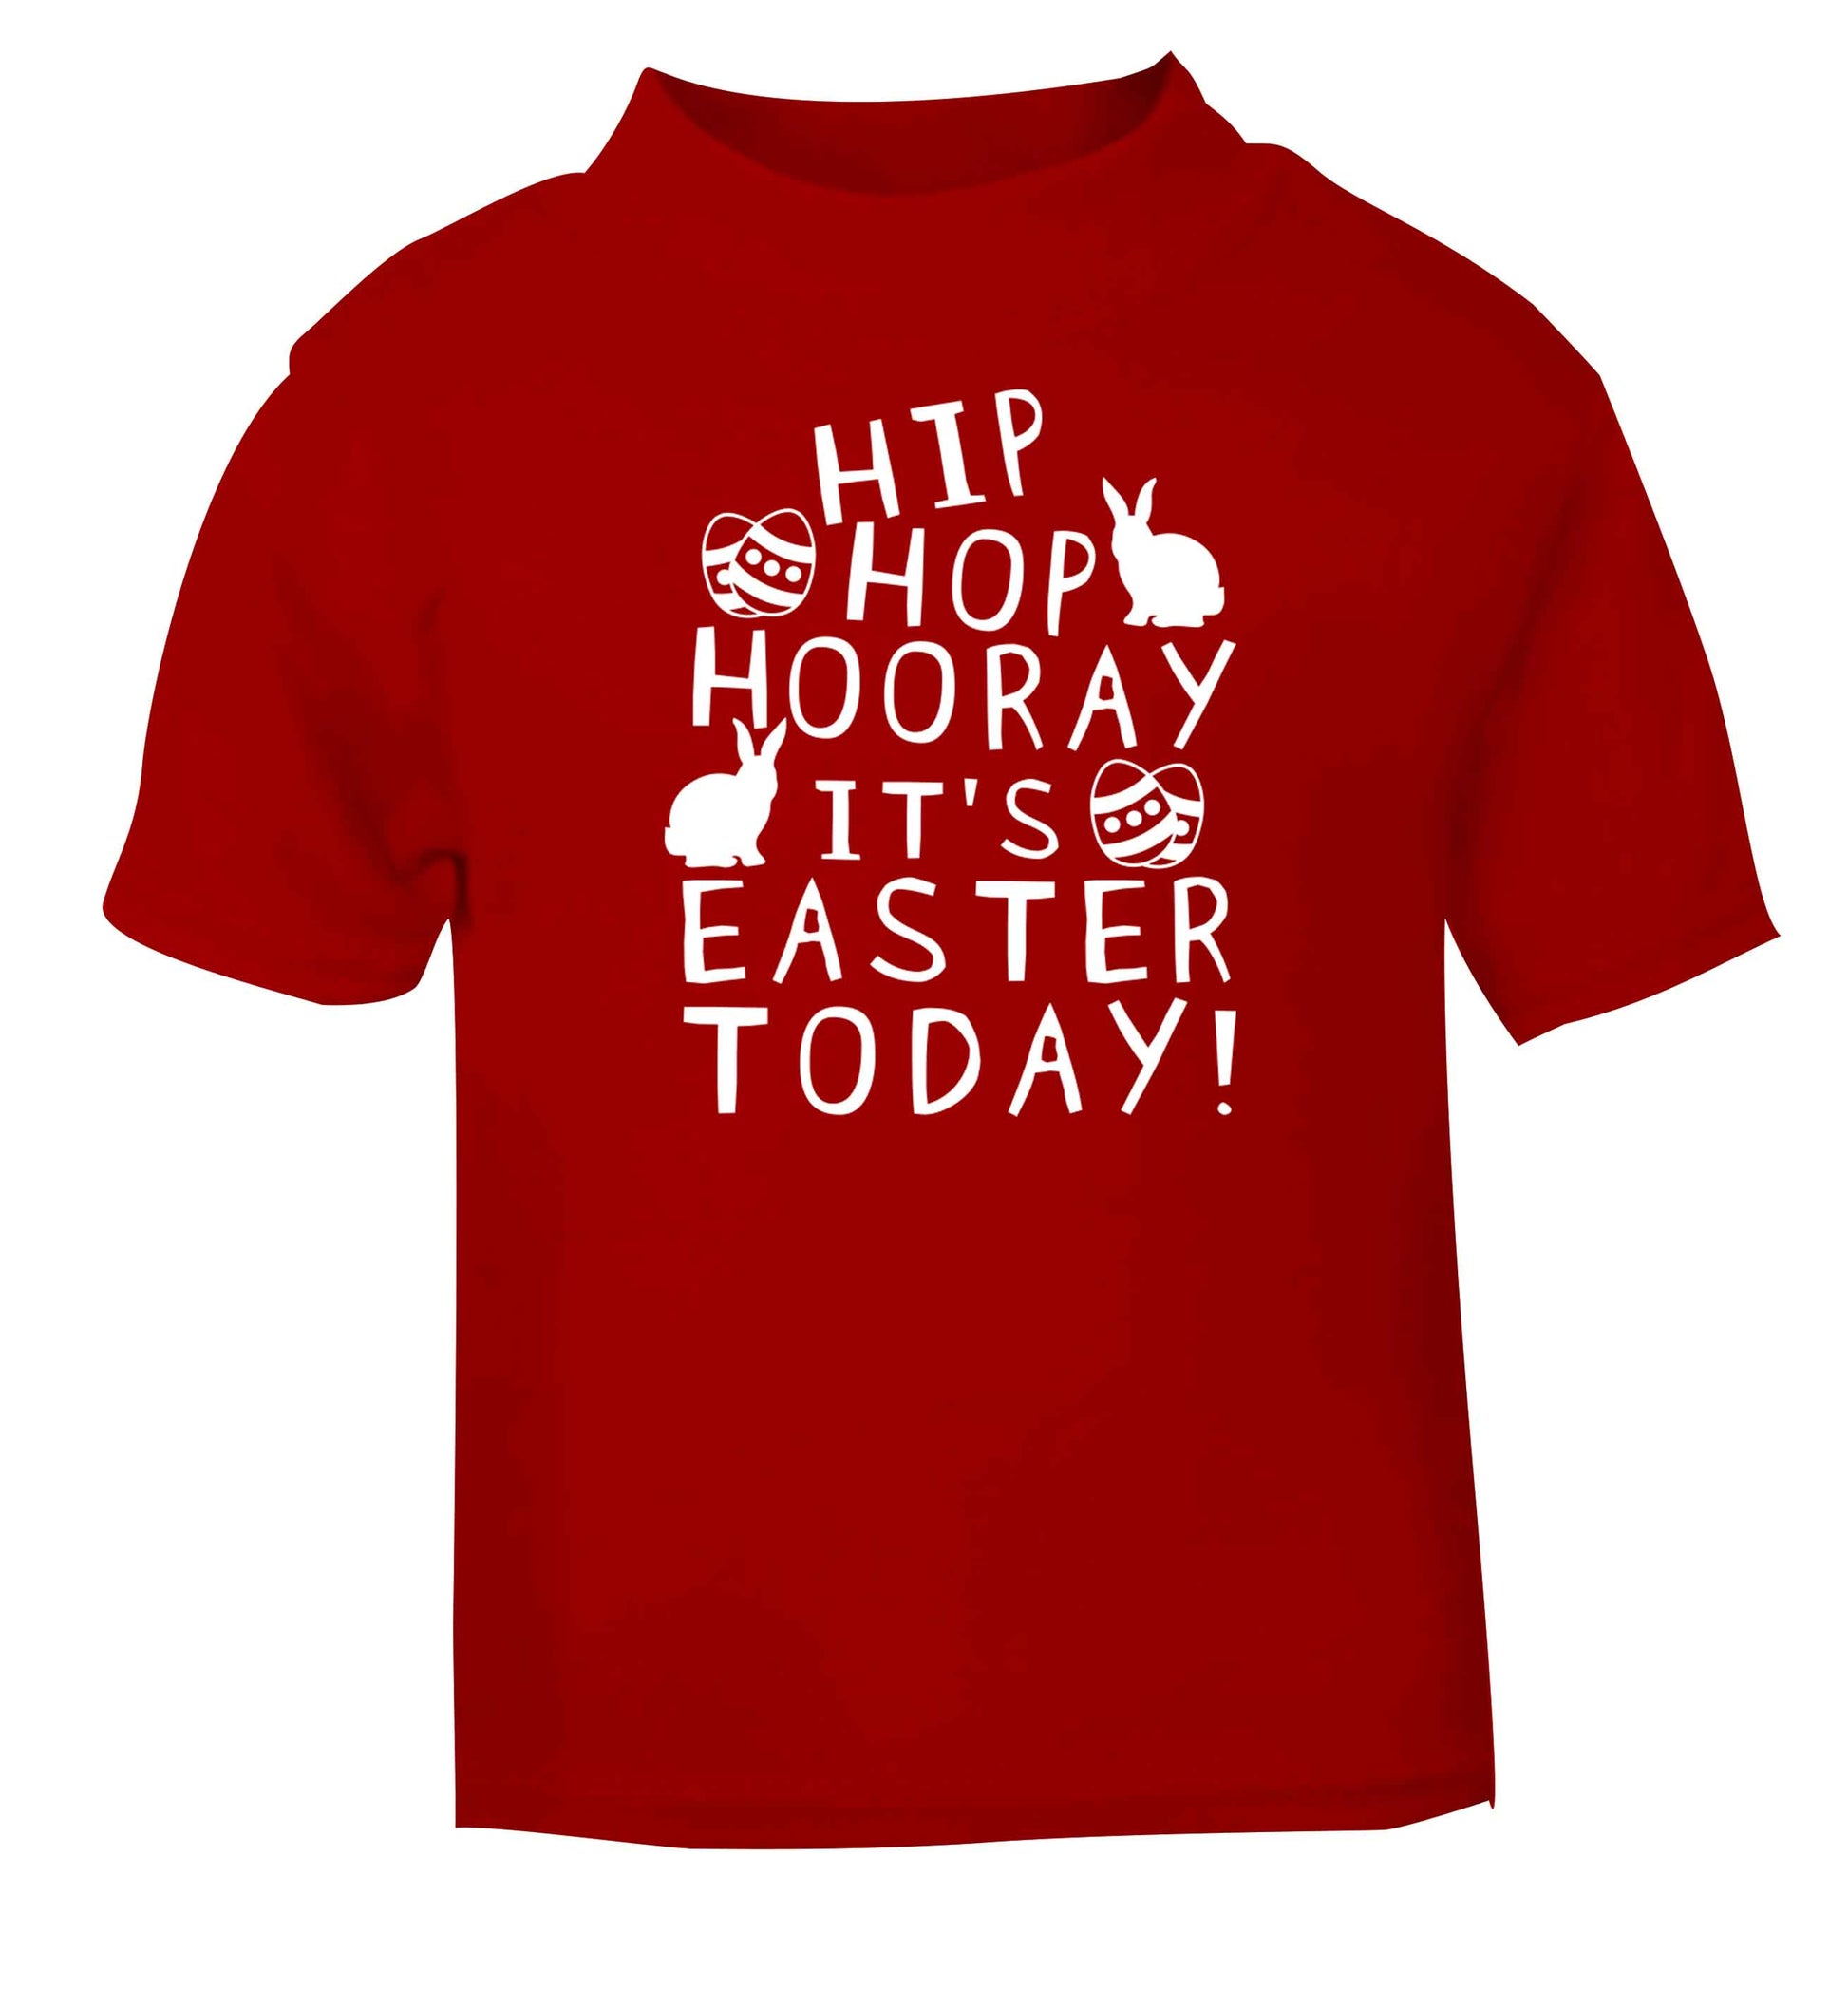 Hip hip hooray it's Easter today! red baby toddler Tshirt 2 Years